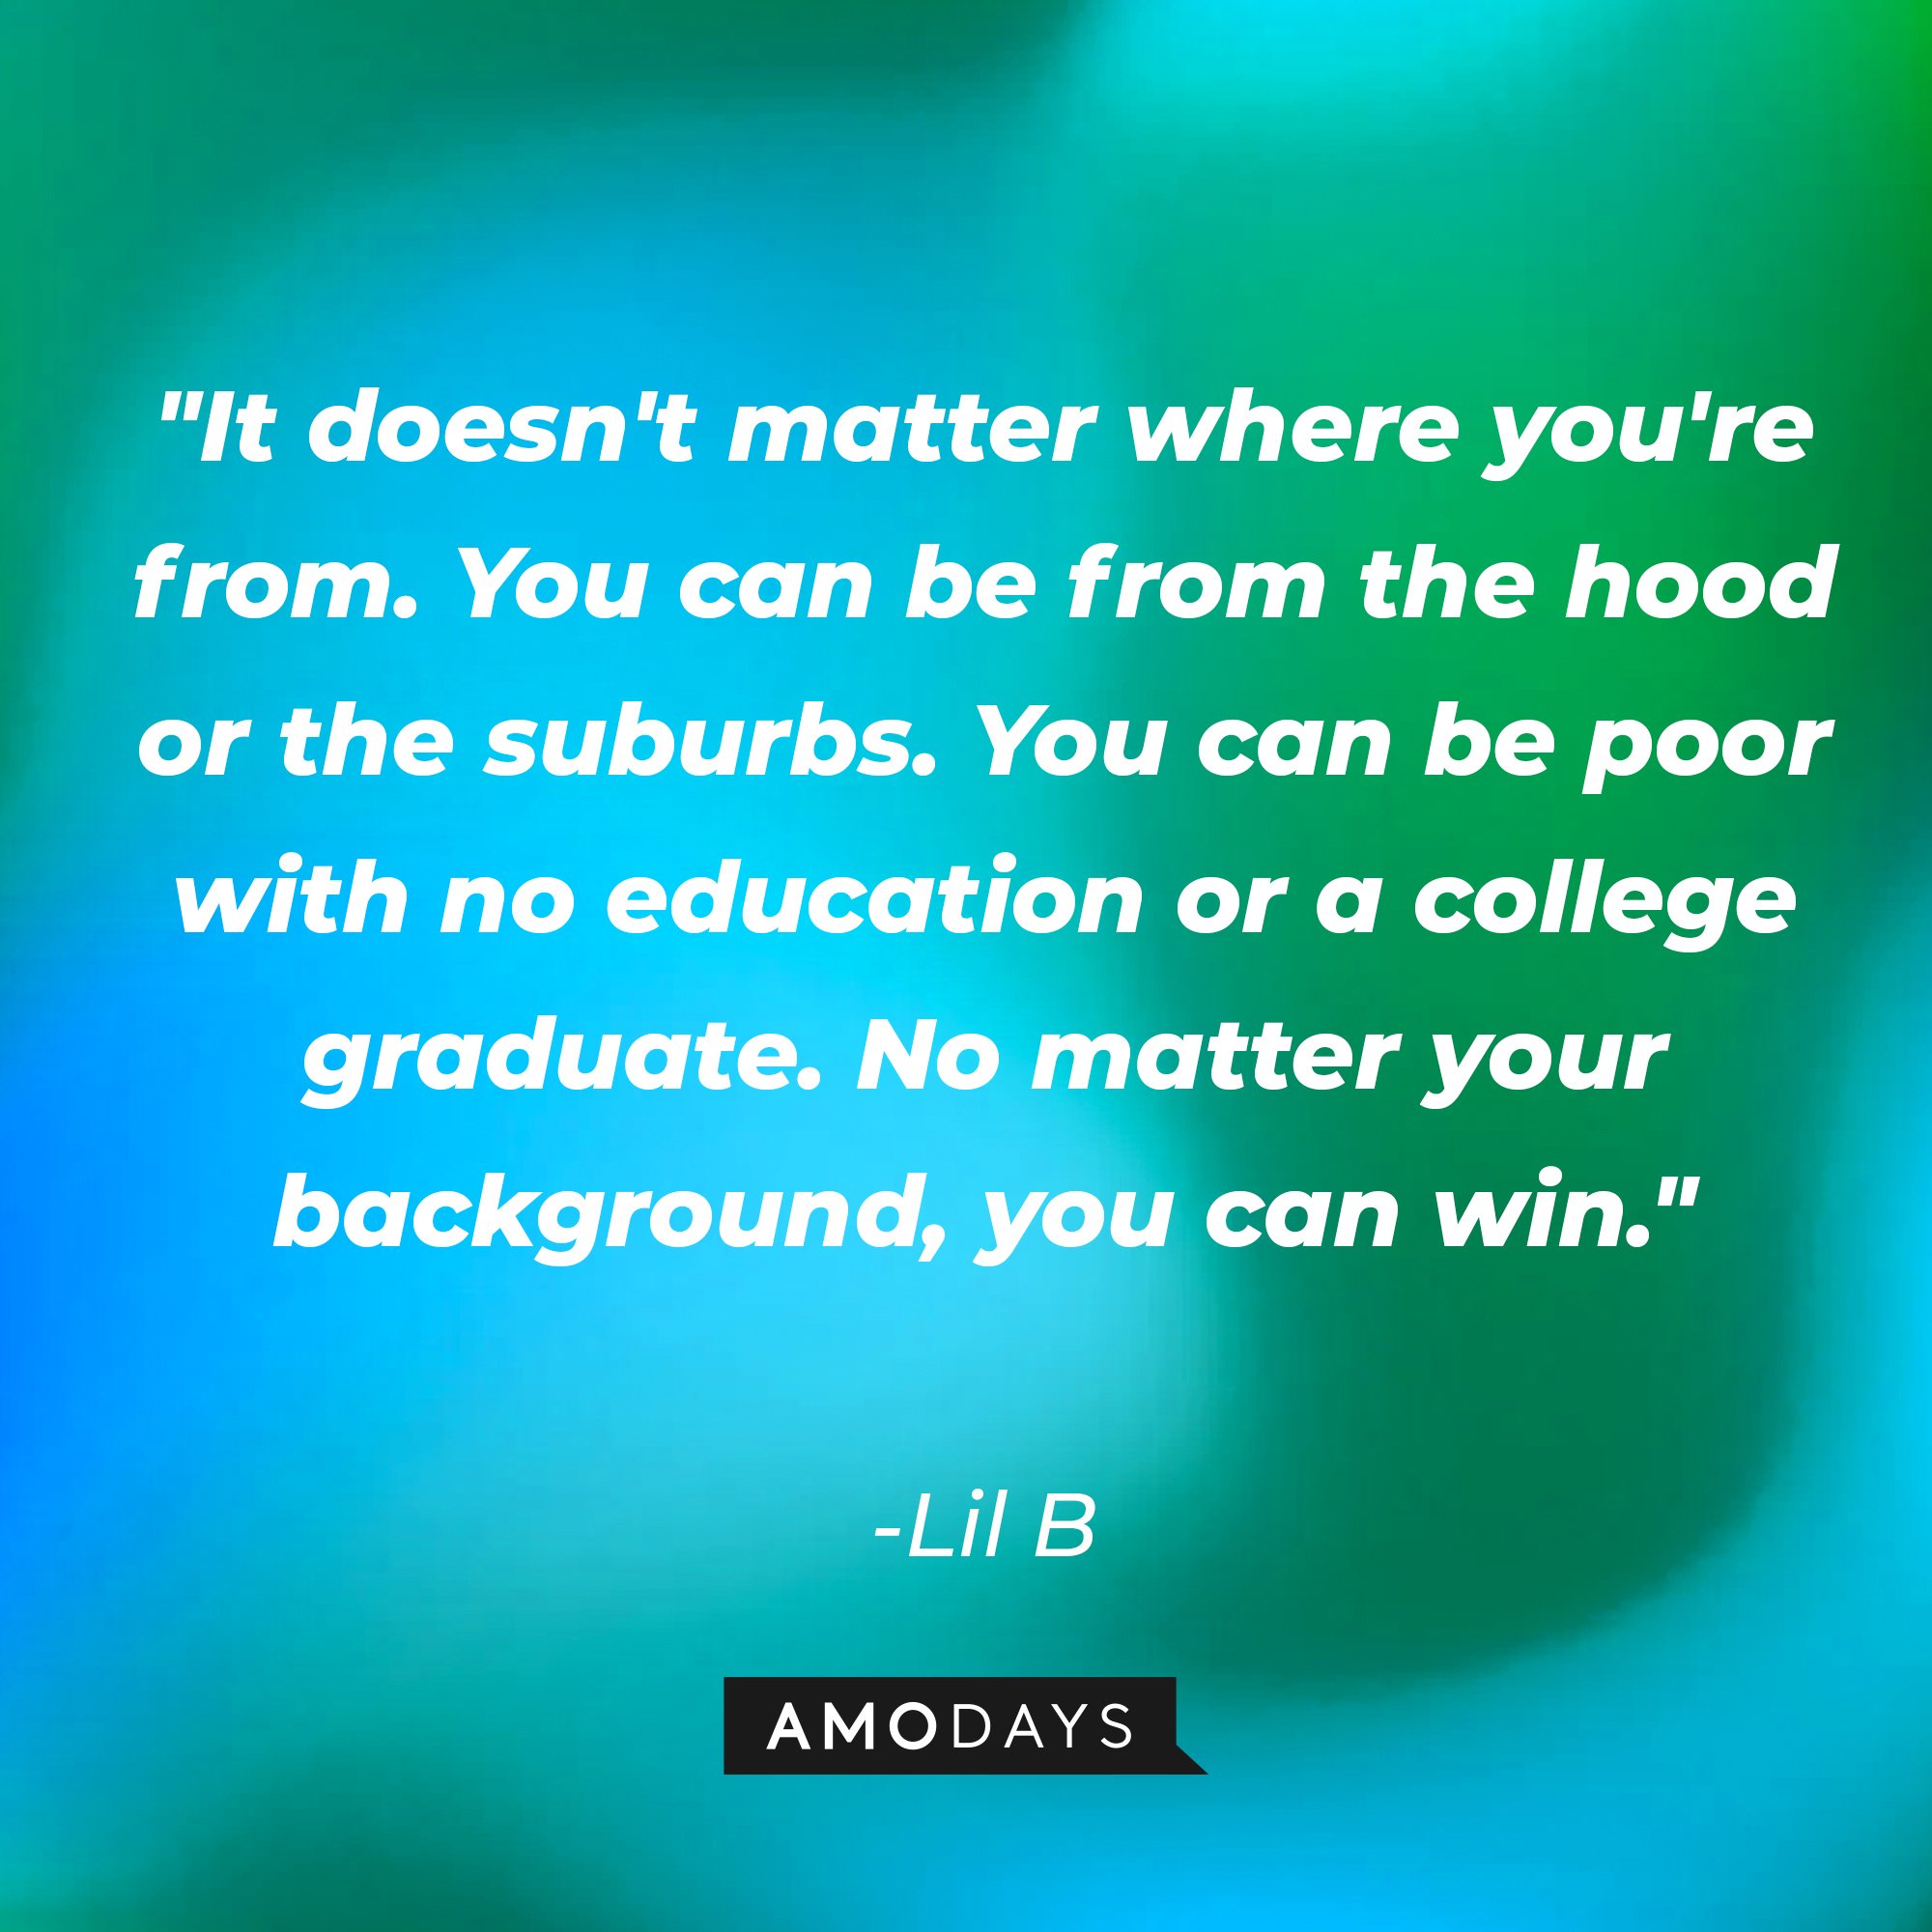 Lil B's quote: "It doesn't matter where you're from. You can be from the hood or the suburbs. You can be poor with no education or a college graduate. No matter your background, you can win." | Image: AmoDays